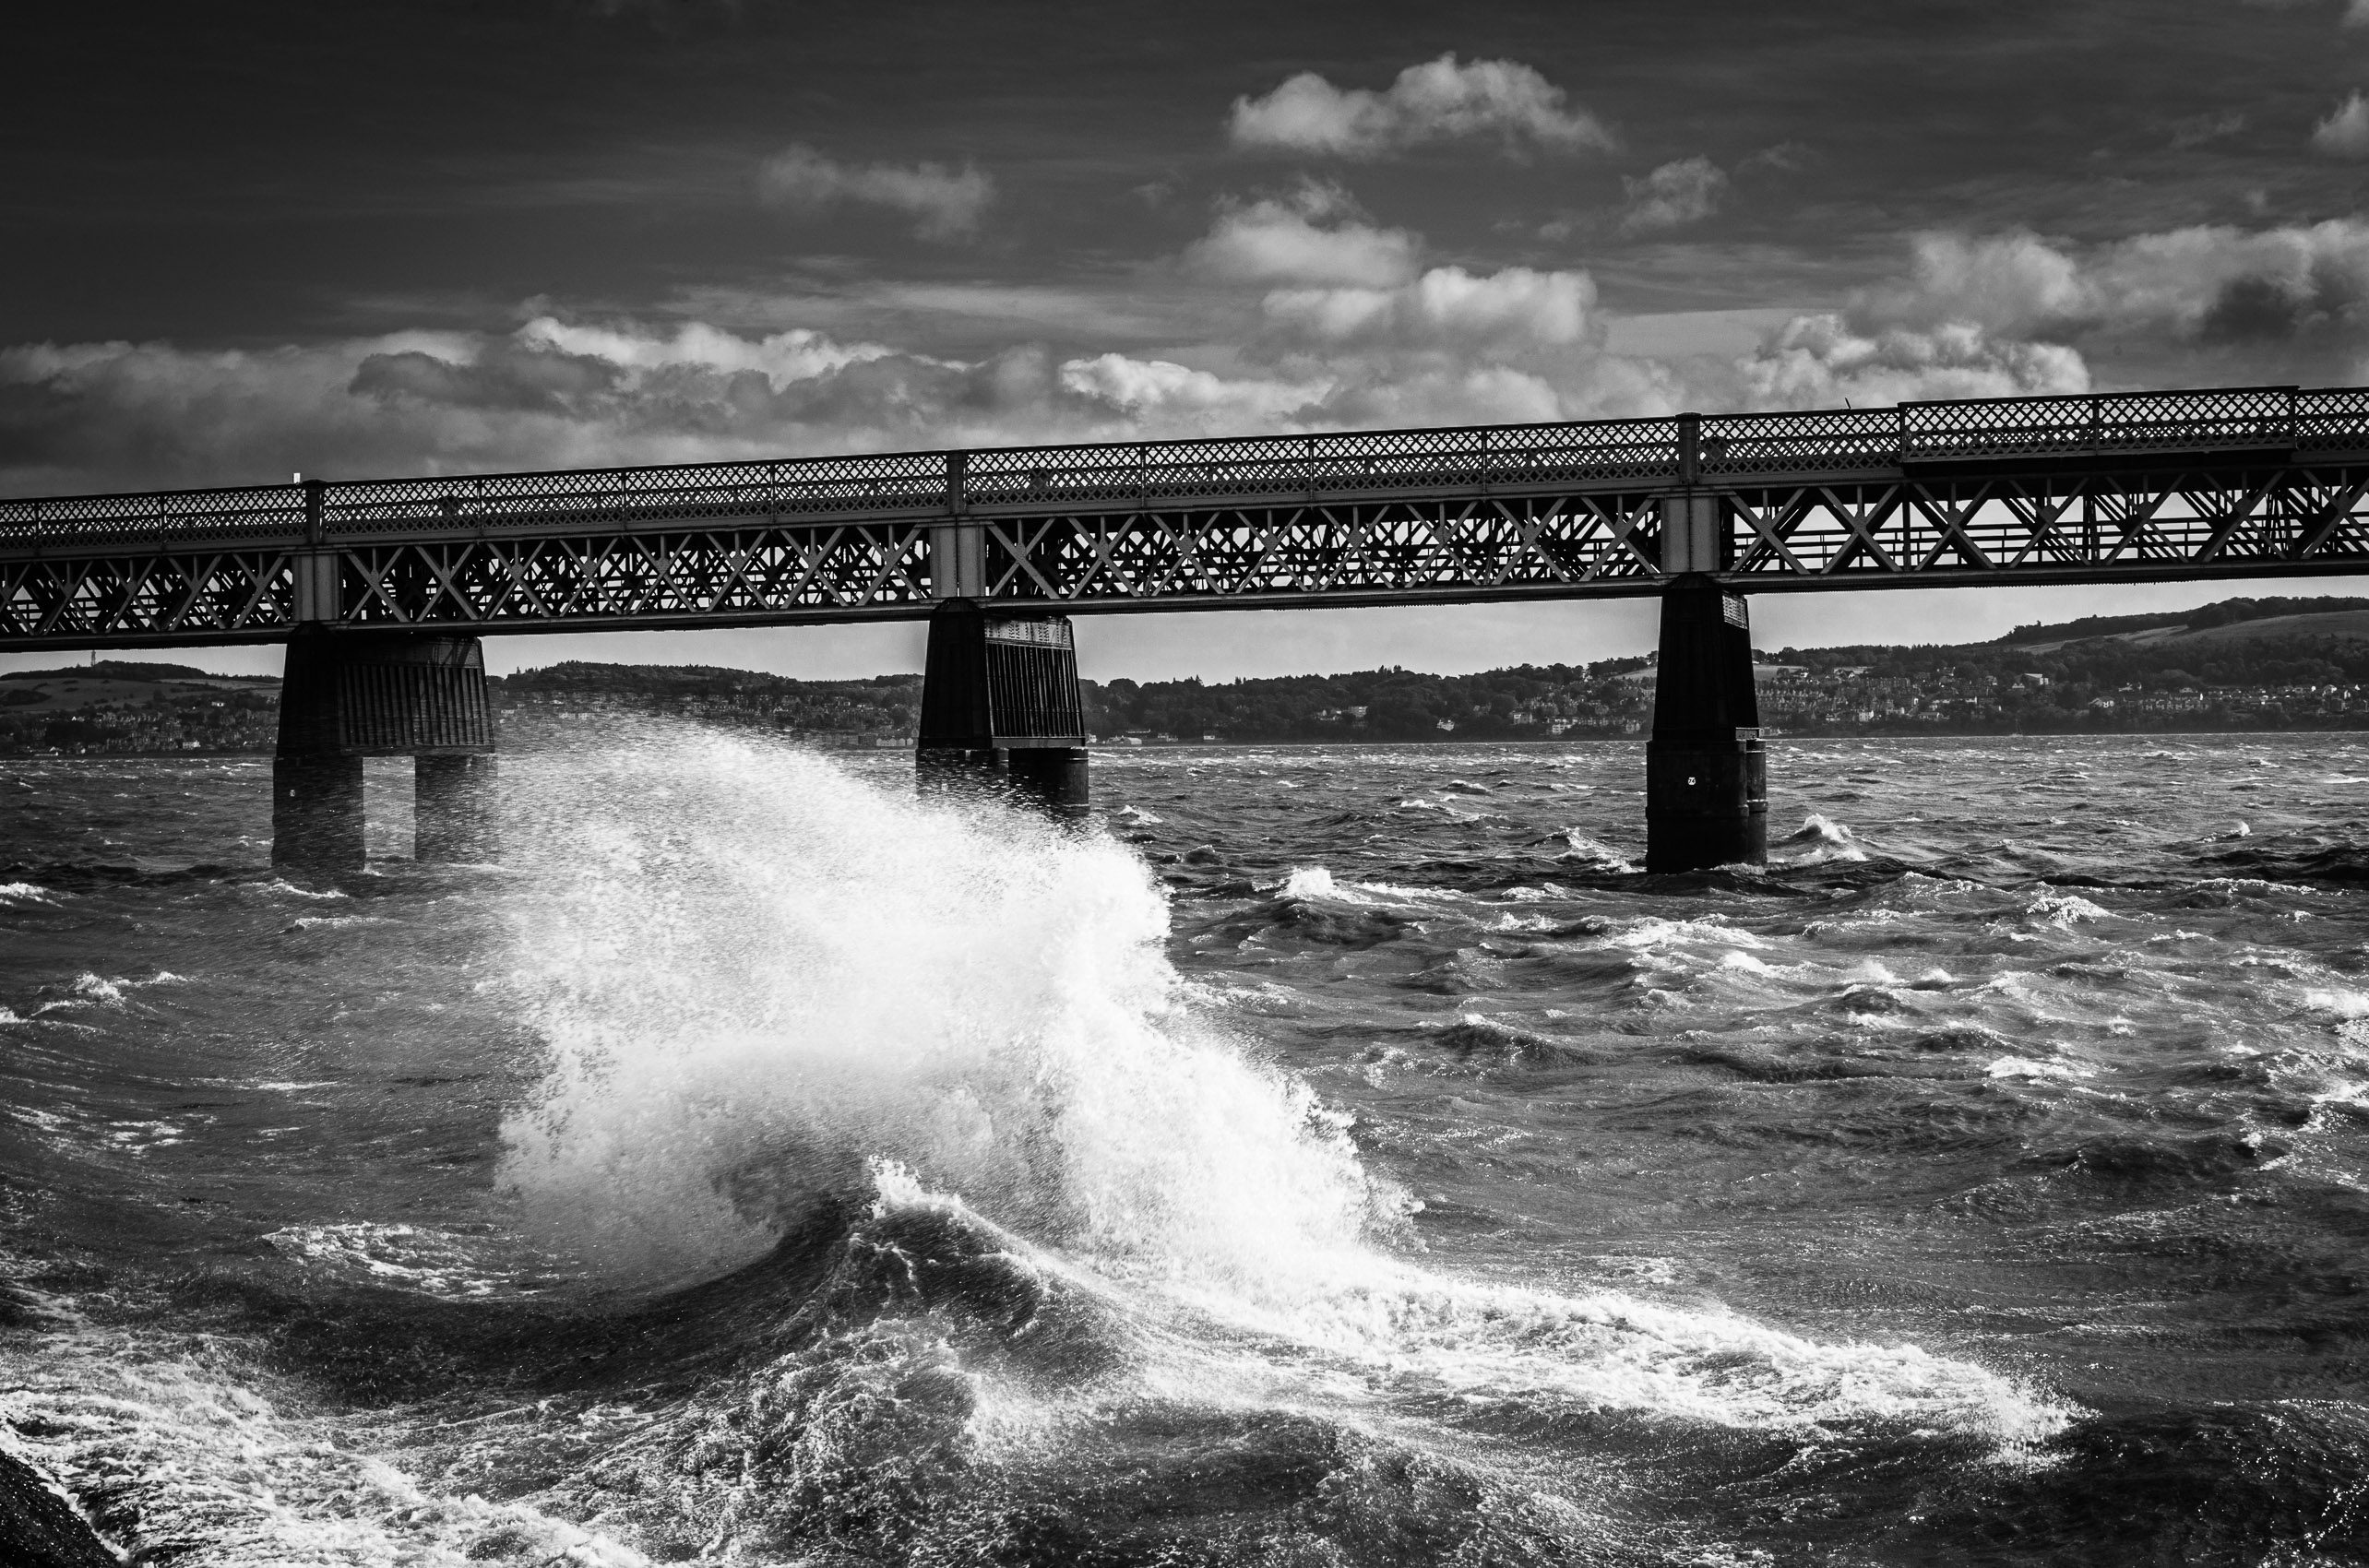 Rough water on the Firth of Tay by the Tay Rail Bridge, Dundee, Scotland, United Kingdom. the Firth of Tay around the Tay Rail Bridge, Dundee, Scotland. DD027